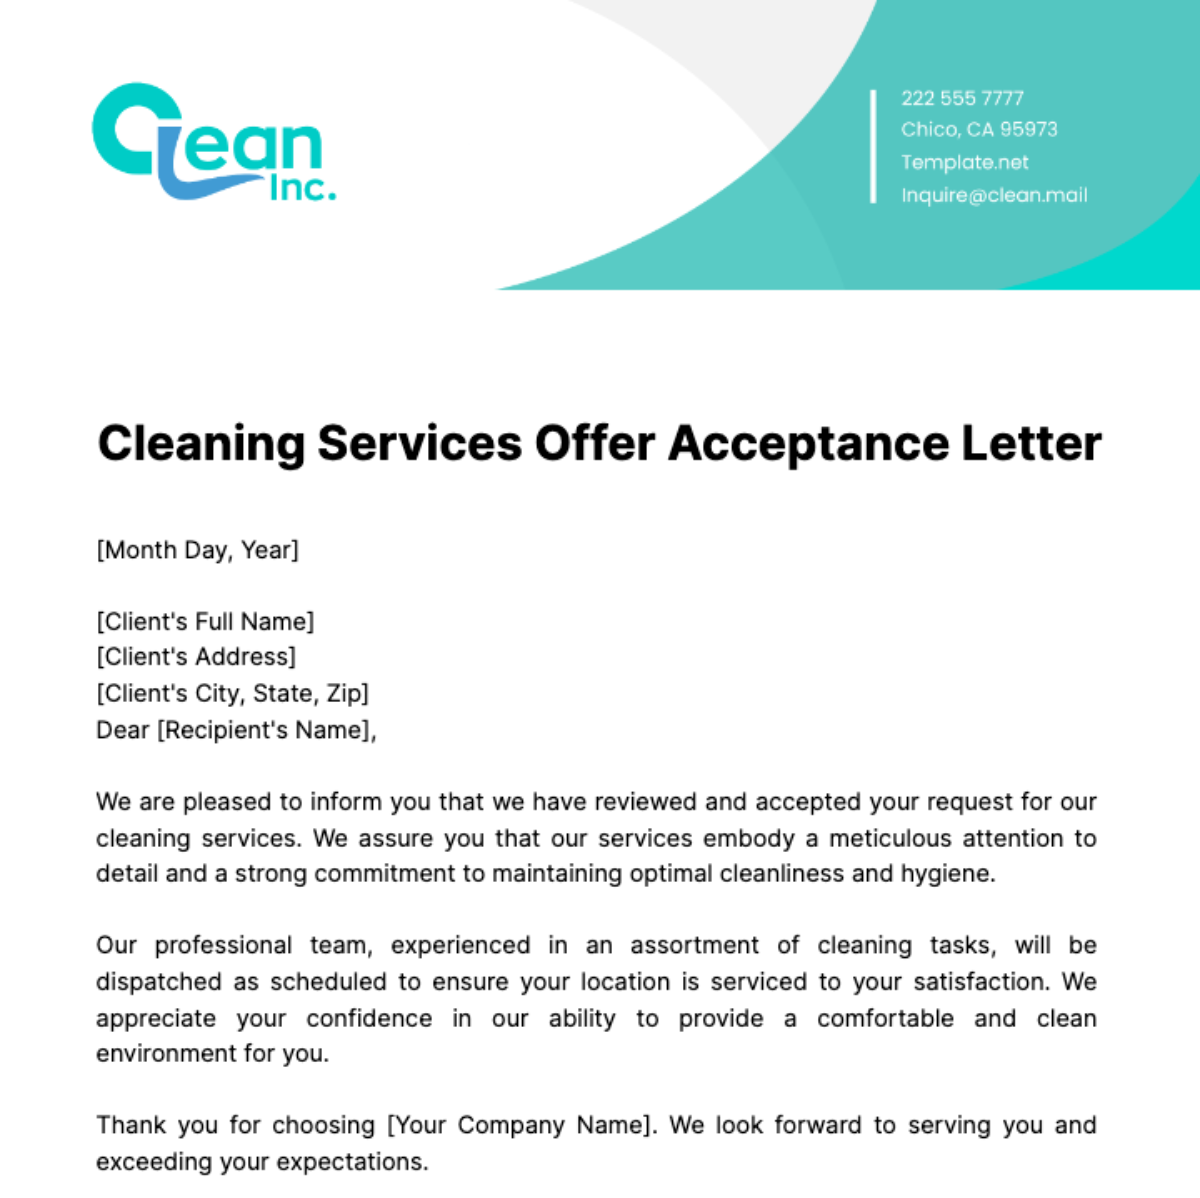 Cleaning Services Offer Acceptance Letter Template